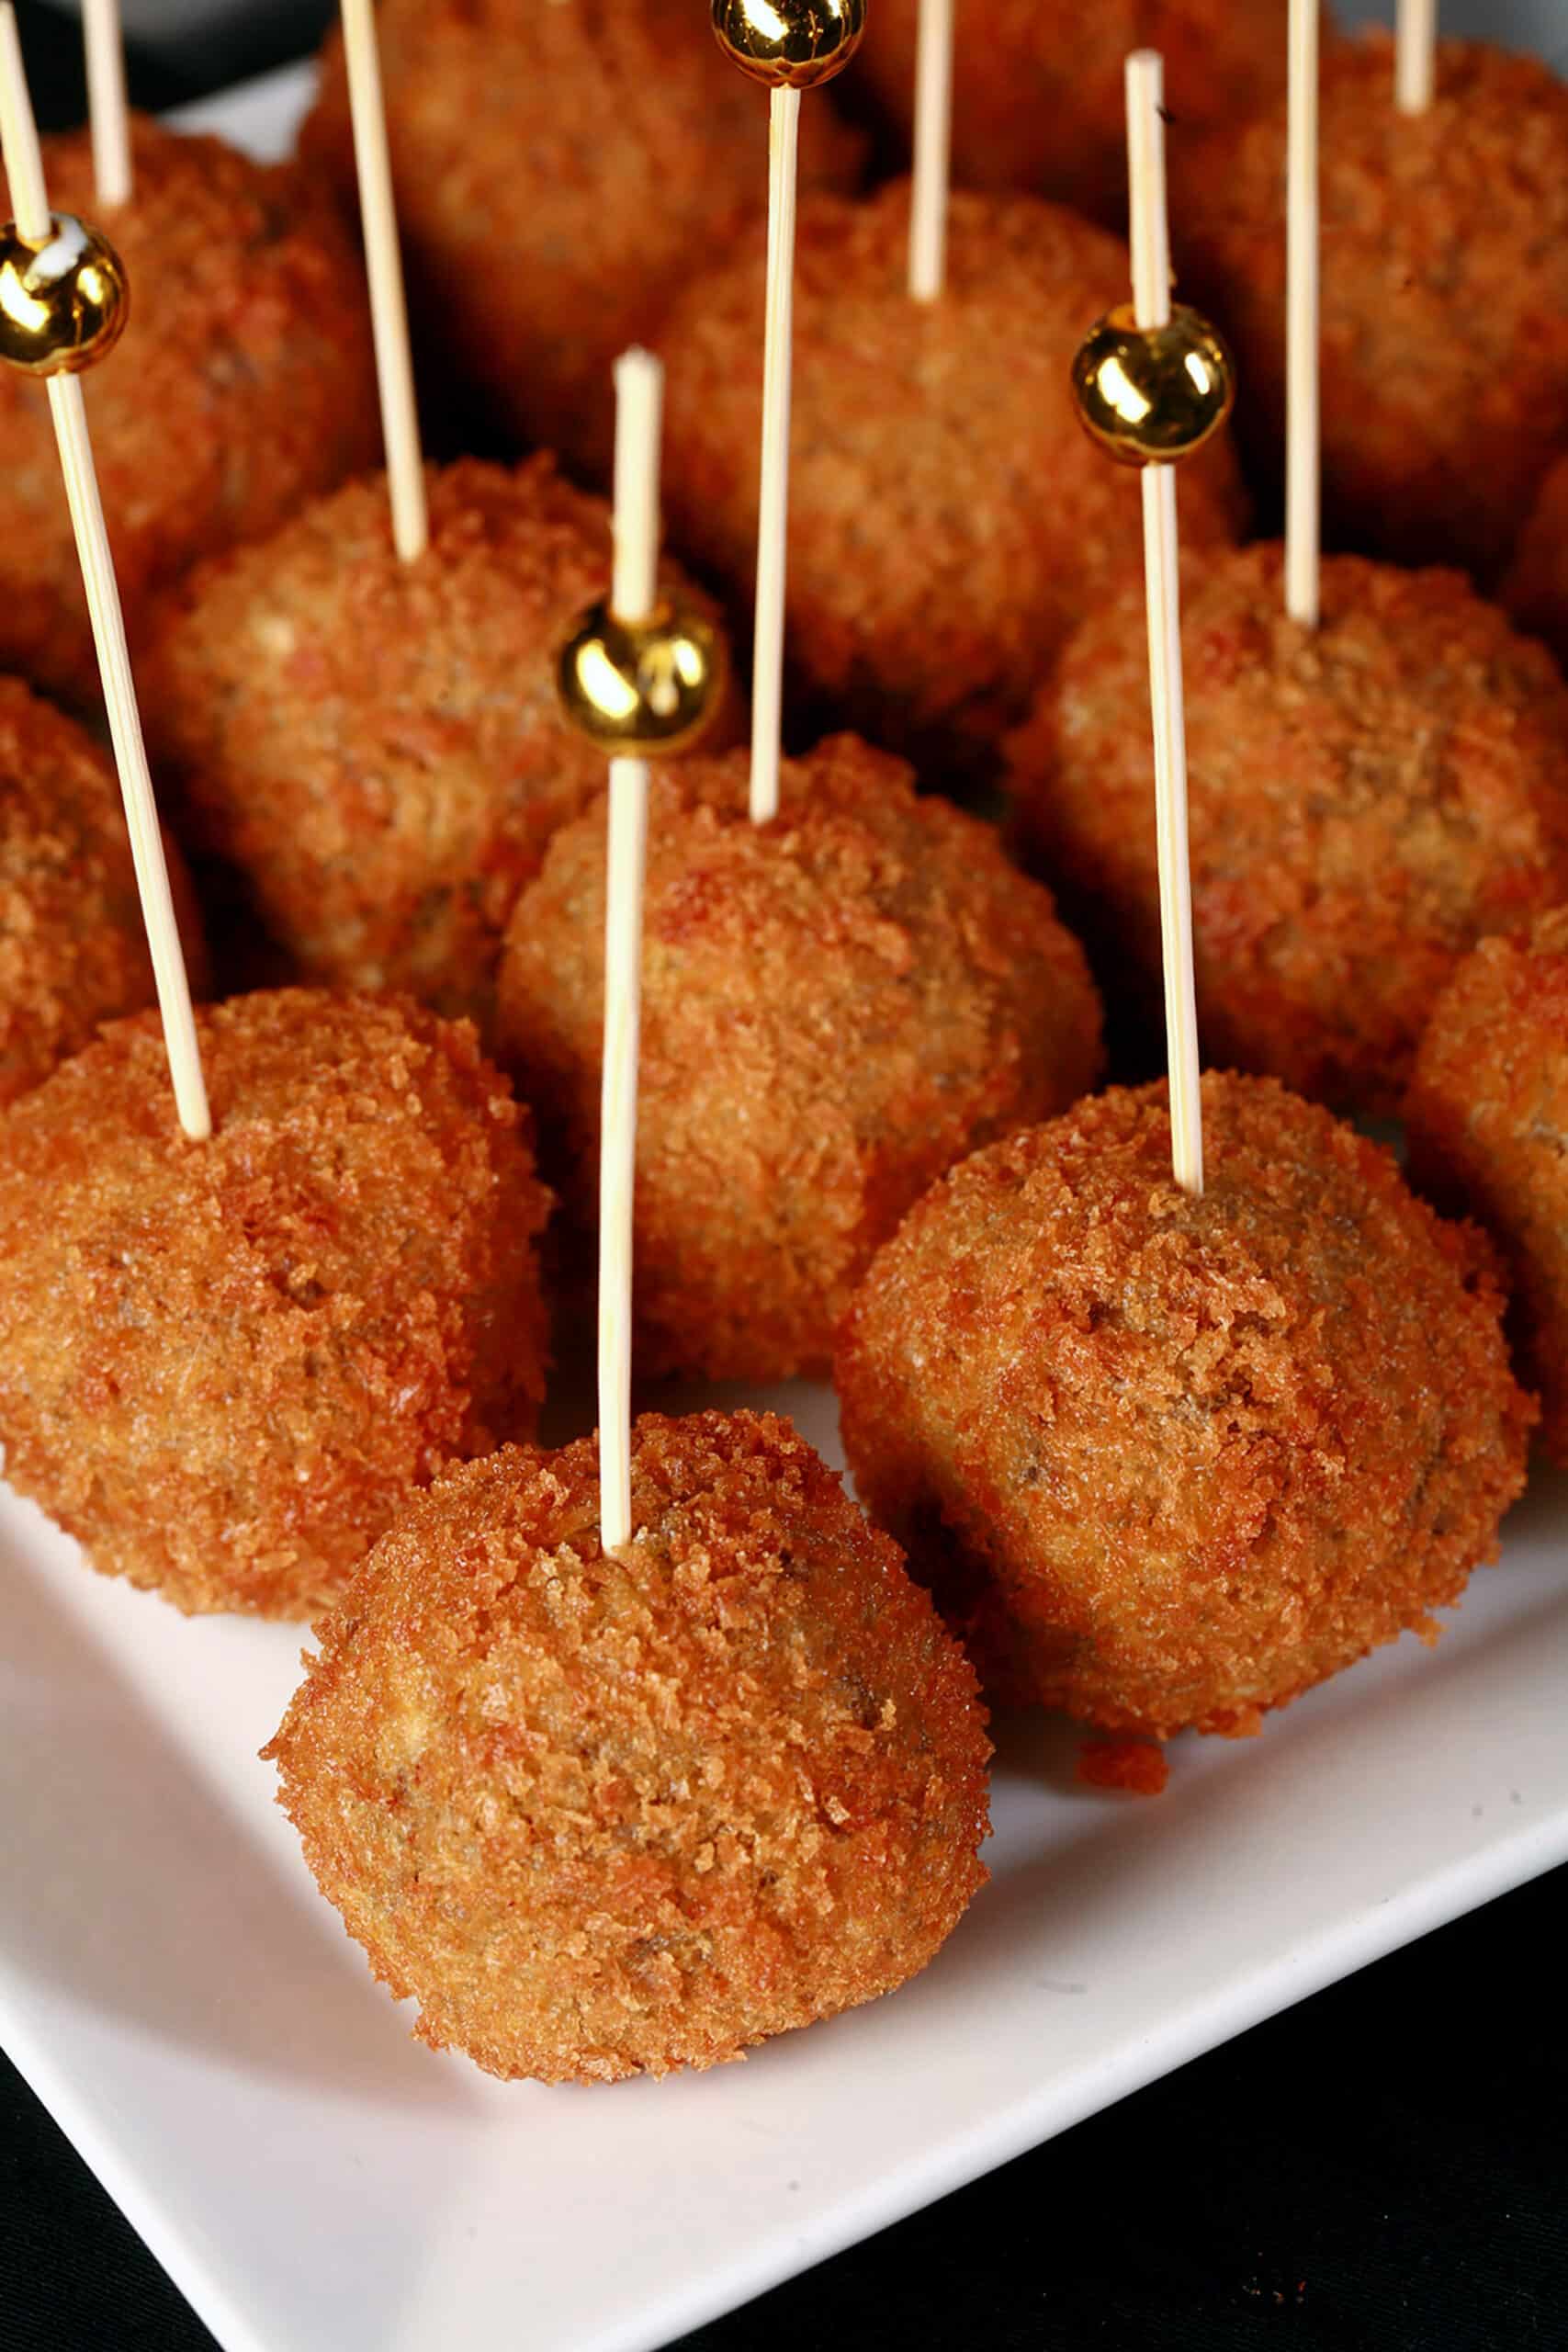 16 mini mushroom risotto balls on a plate, each with a tall toothpick topped with a gold ball.